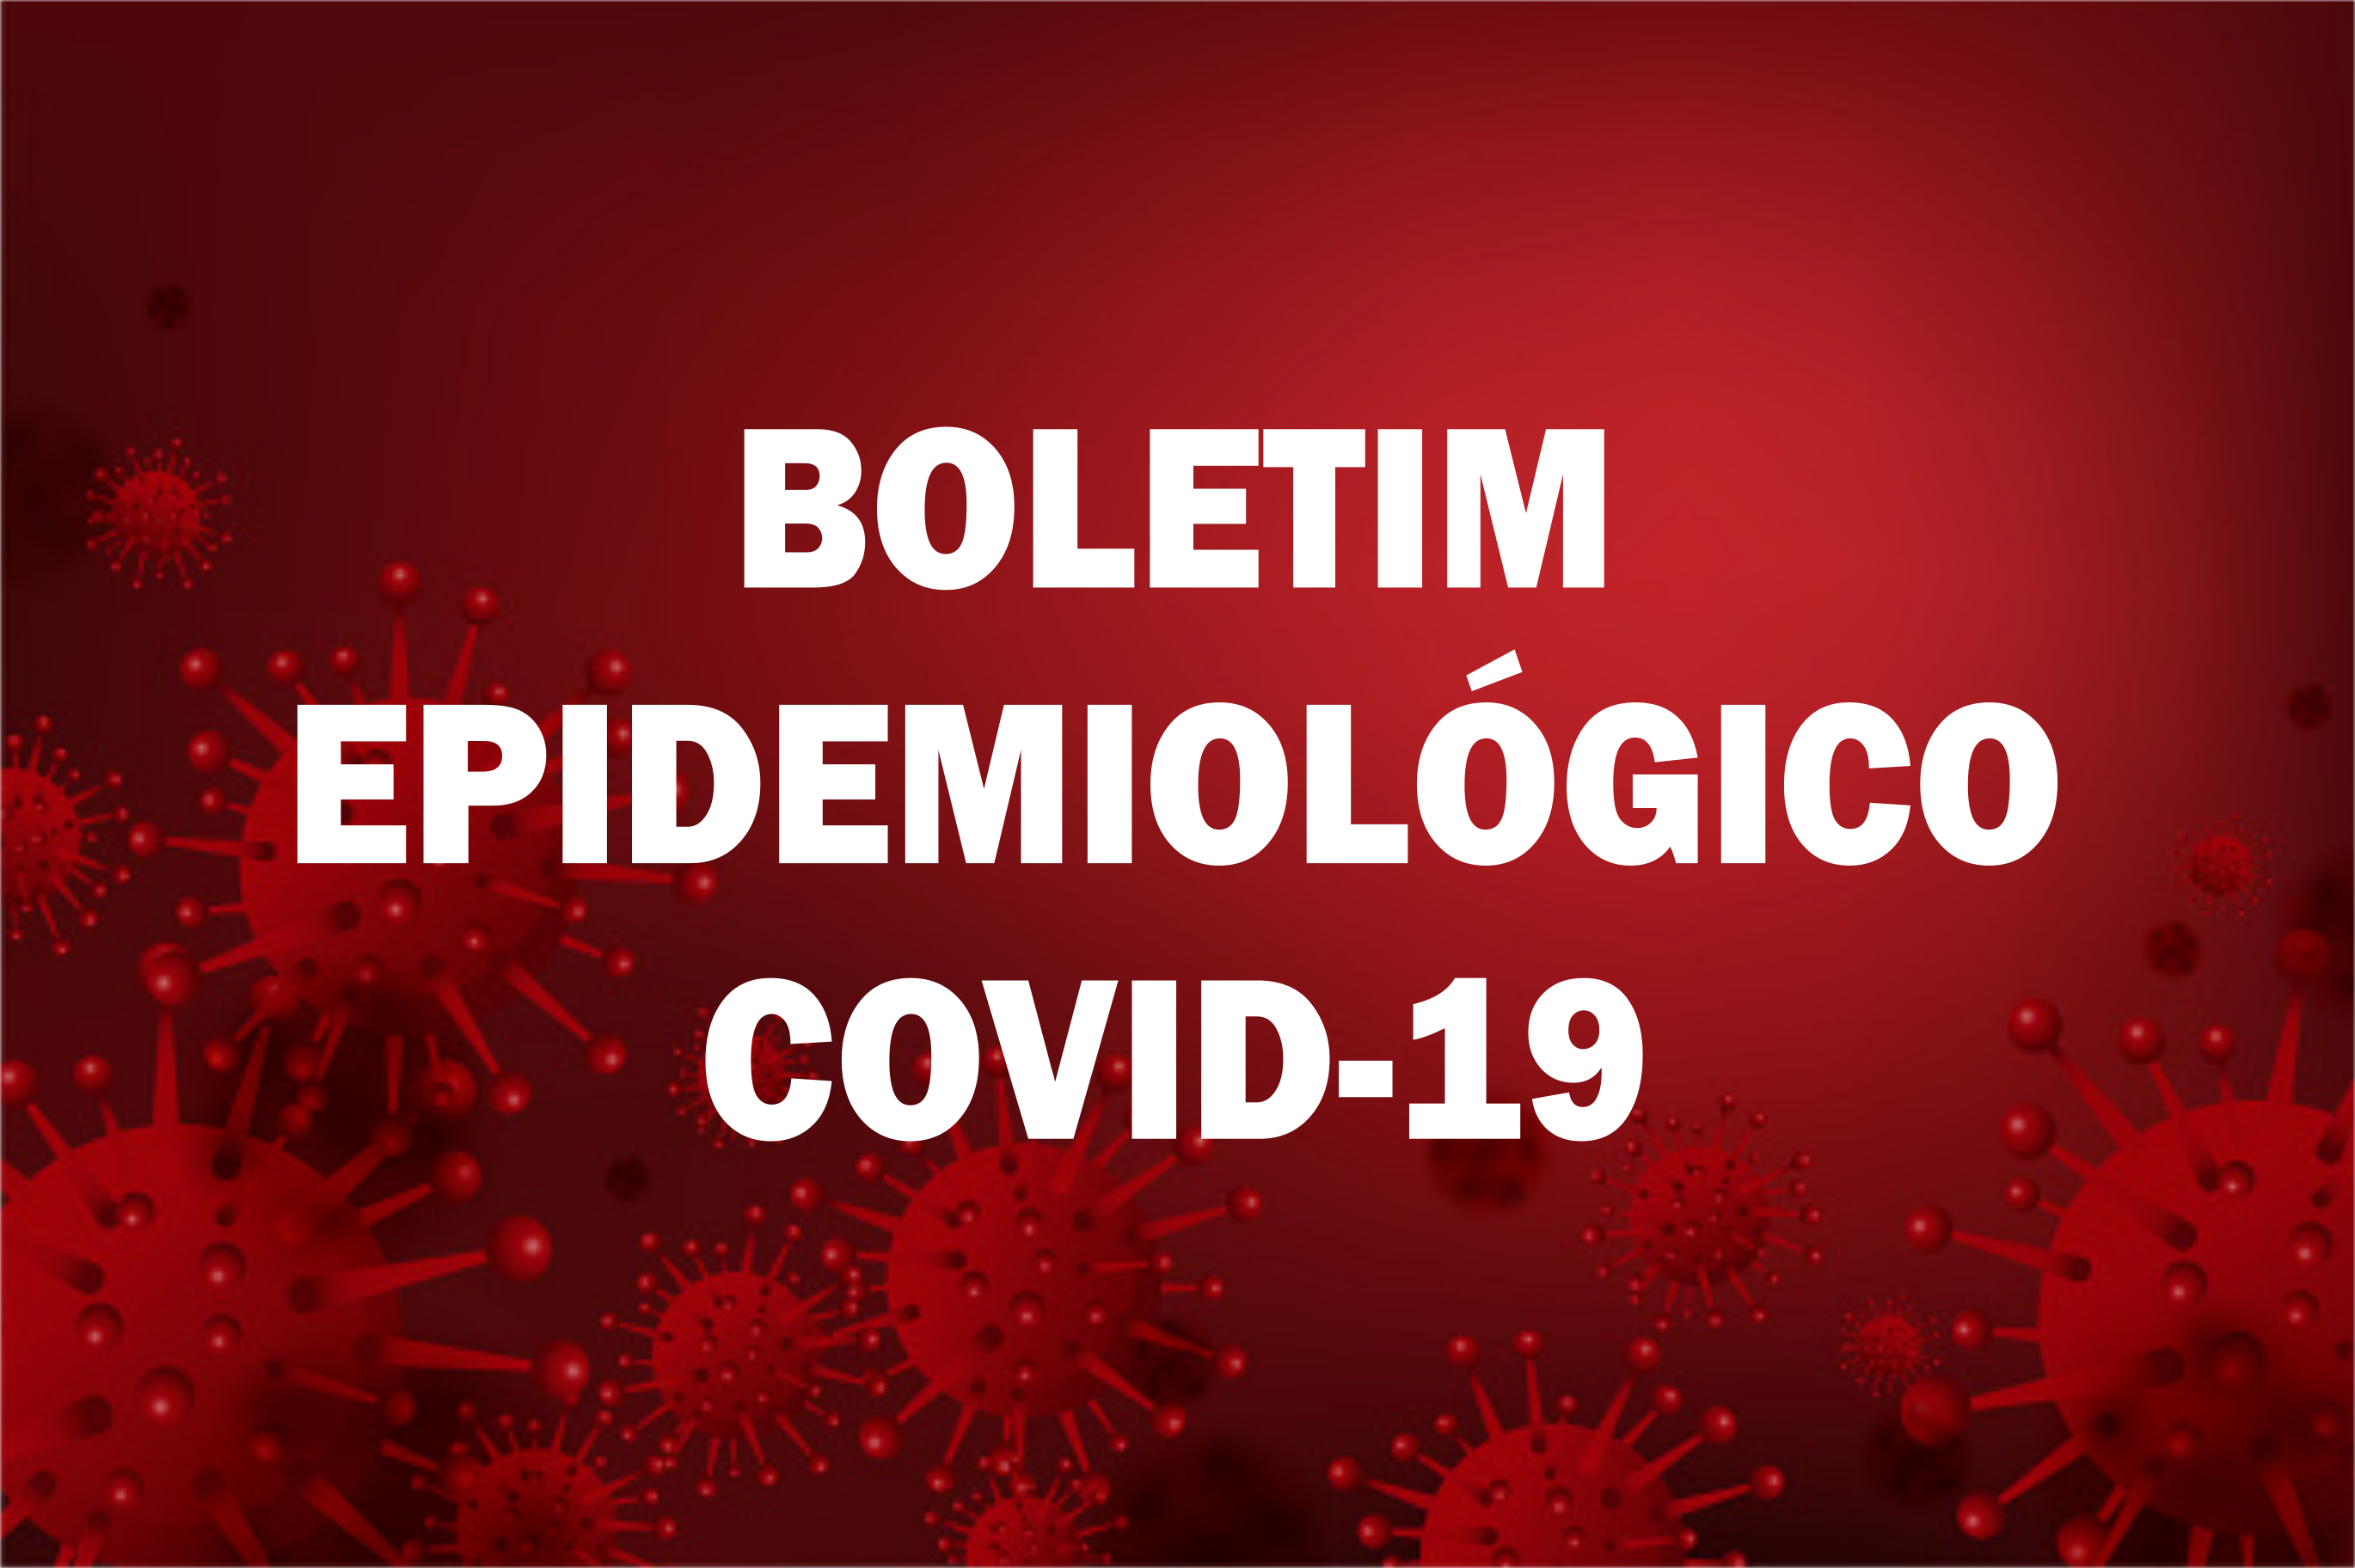 You are currently viewing BOLETIM EPIDEMIOLÓGICO Nº 151 (COVID-19)